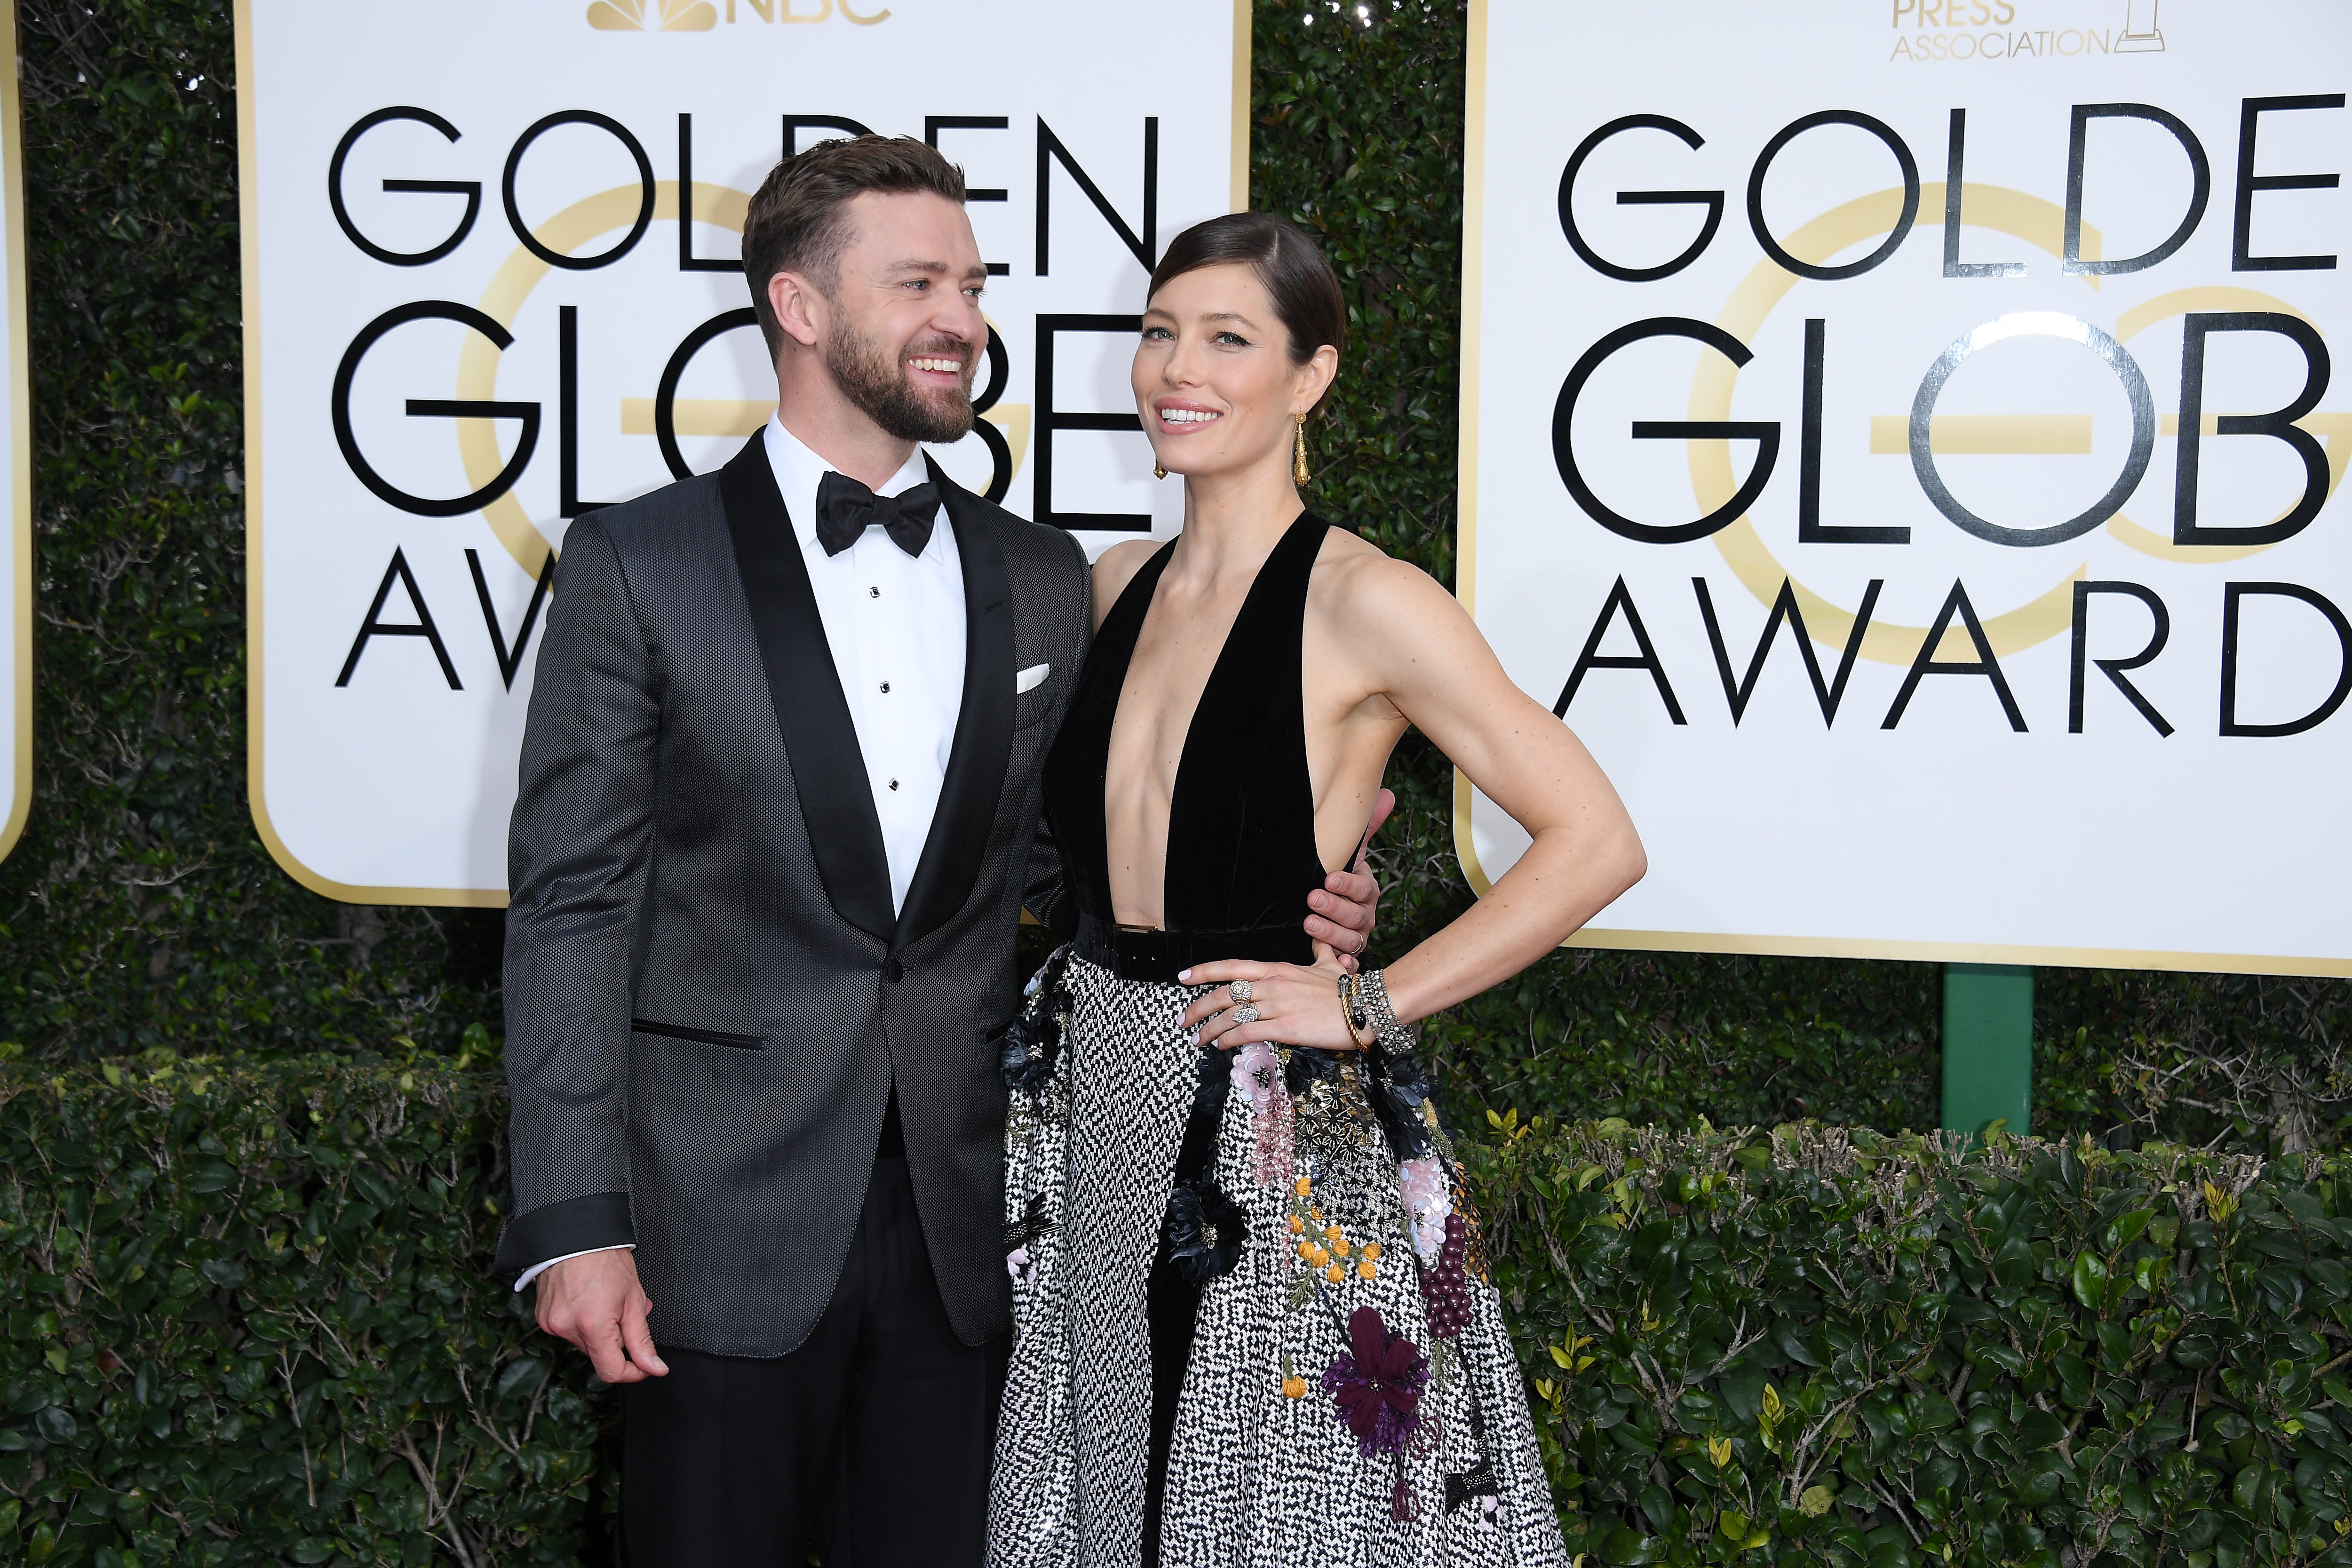 Justin Timberlake Sings for Jessica Biel on Their Wedding Anniversary photo